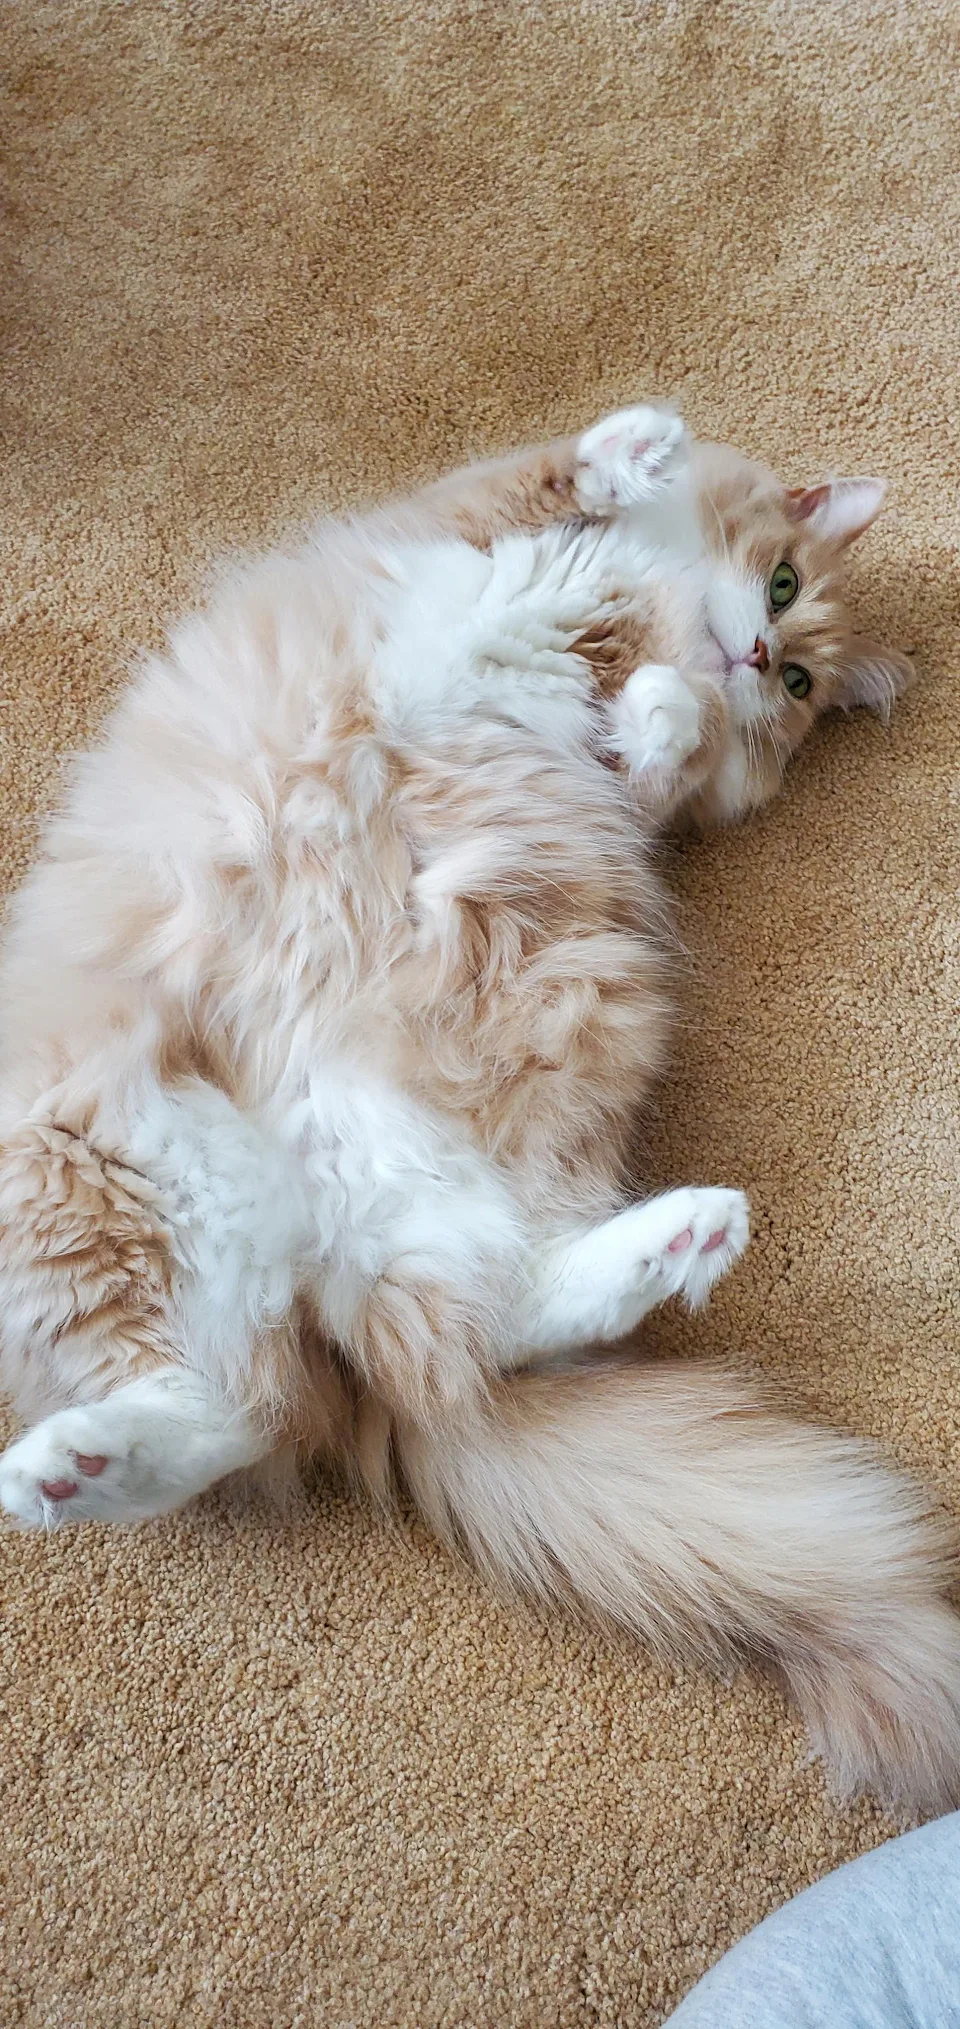 Butters and all her floofiness